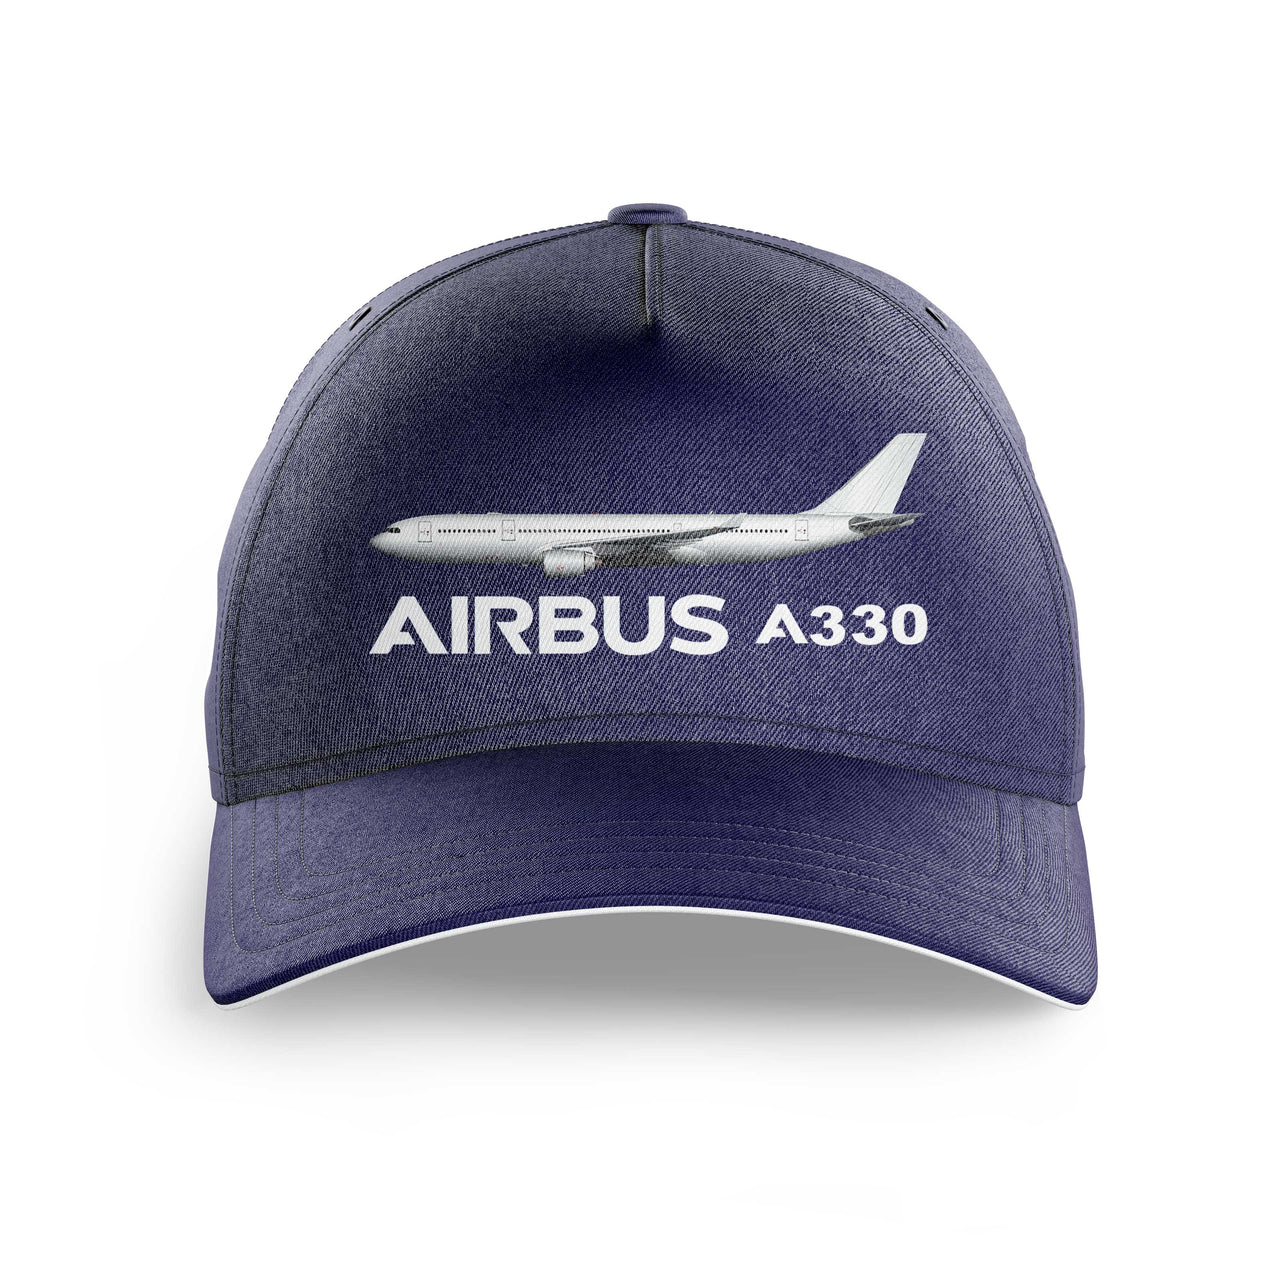 The Airbus A330 Printed Hats